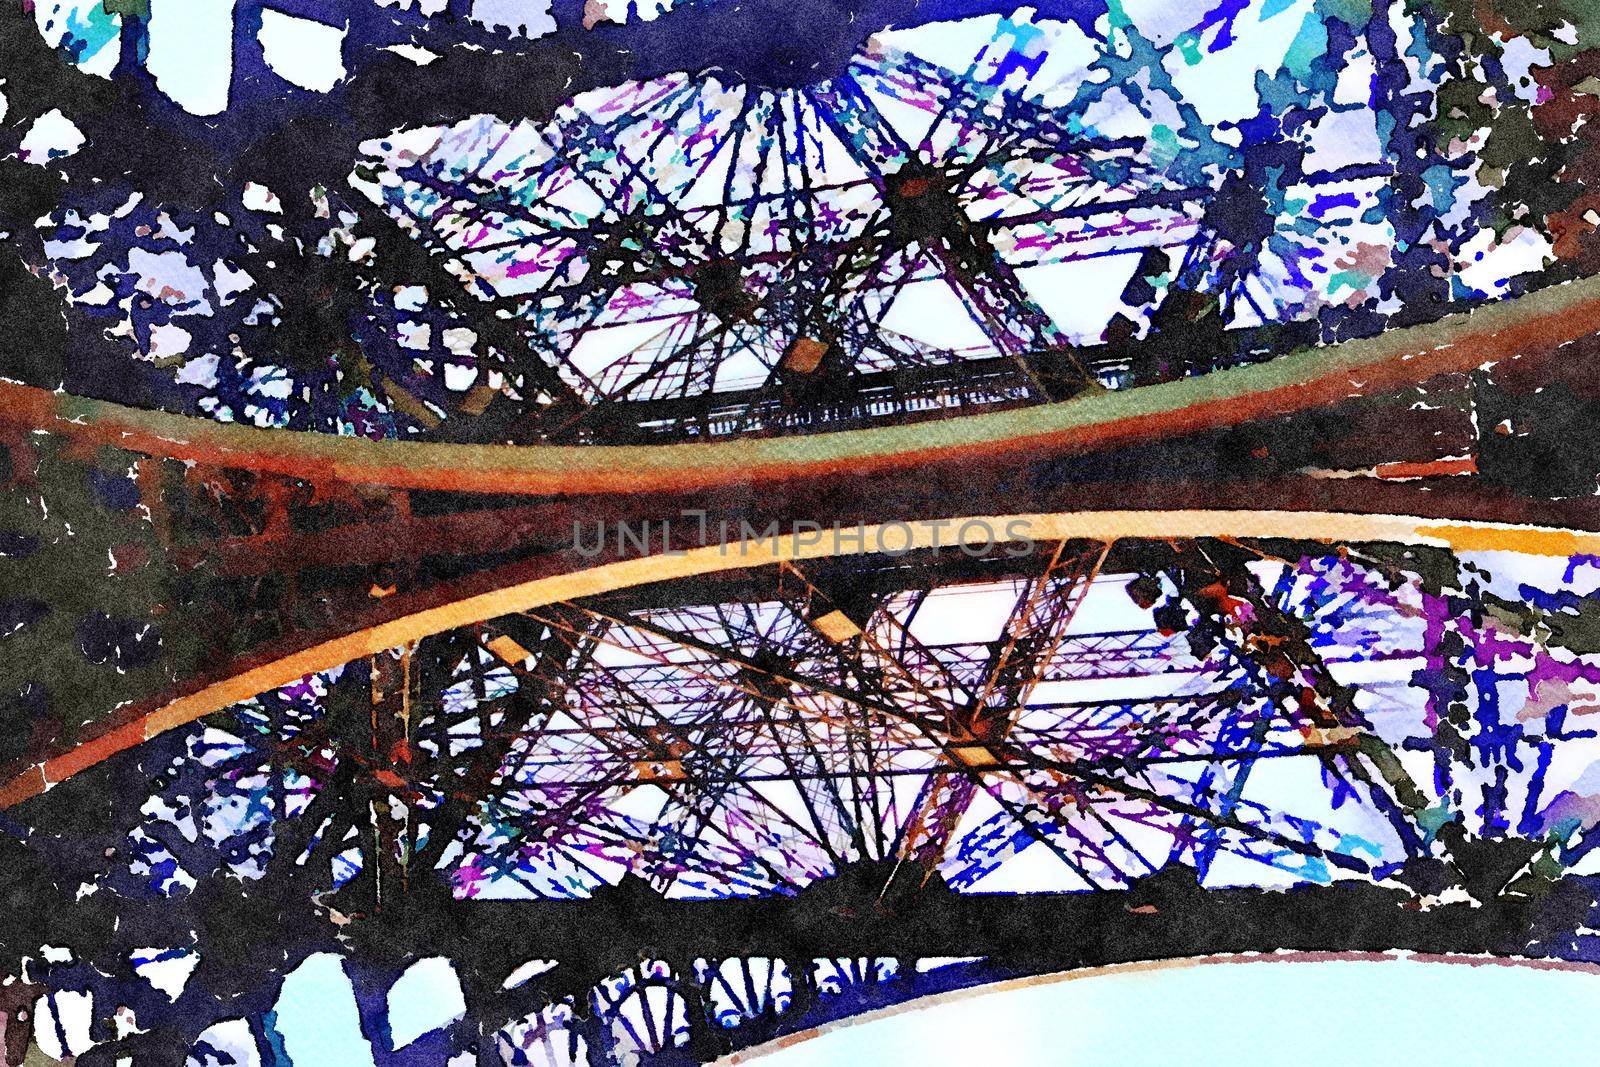 watercolor of the lower metal structure of the Eiffel Tower in Paris on an autumn day